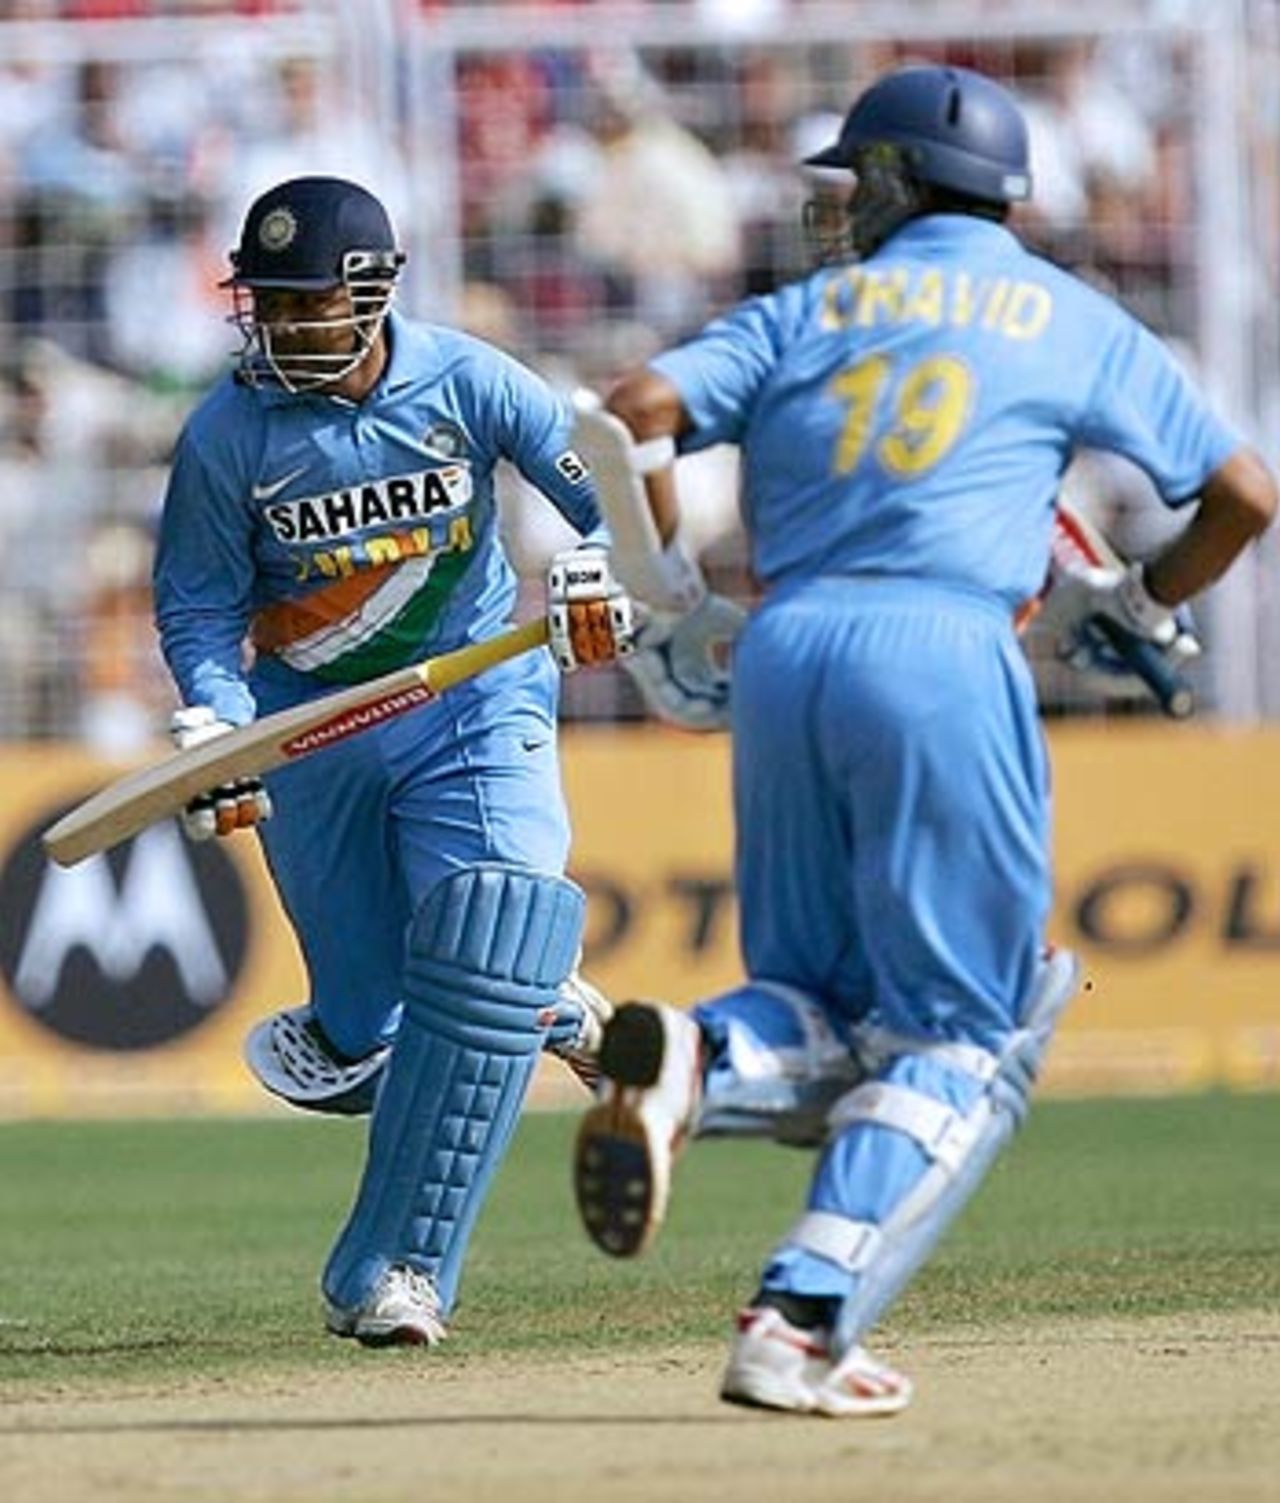 Virender Sehwag and Rahul Dravid steal a single, India v England, 3rd ODI, Goa, April 3, 2006